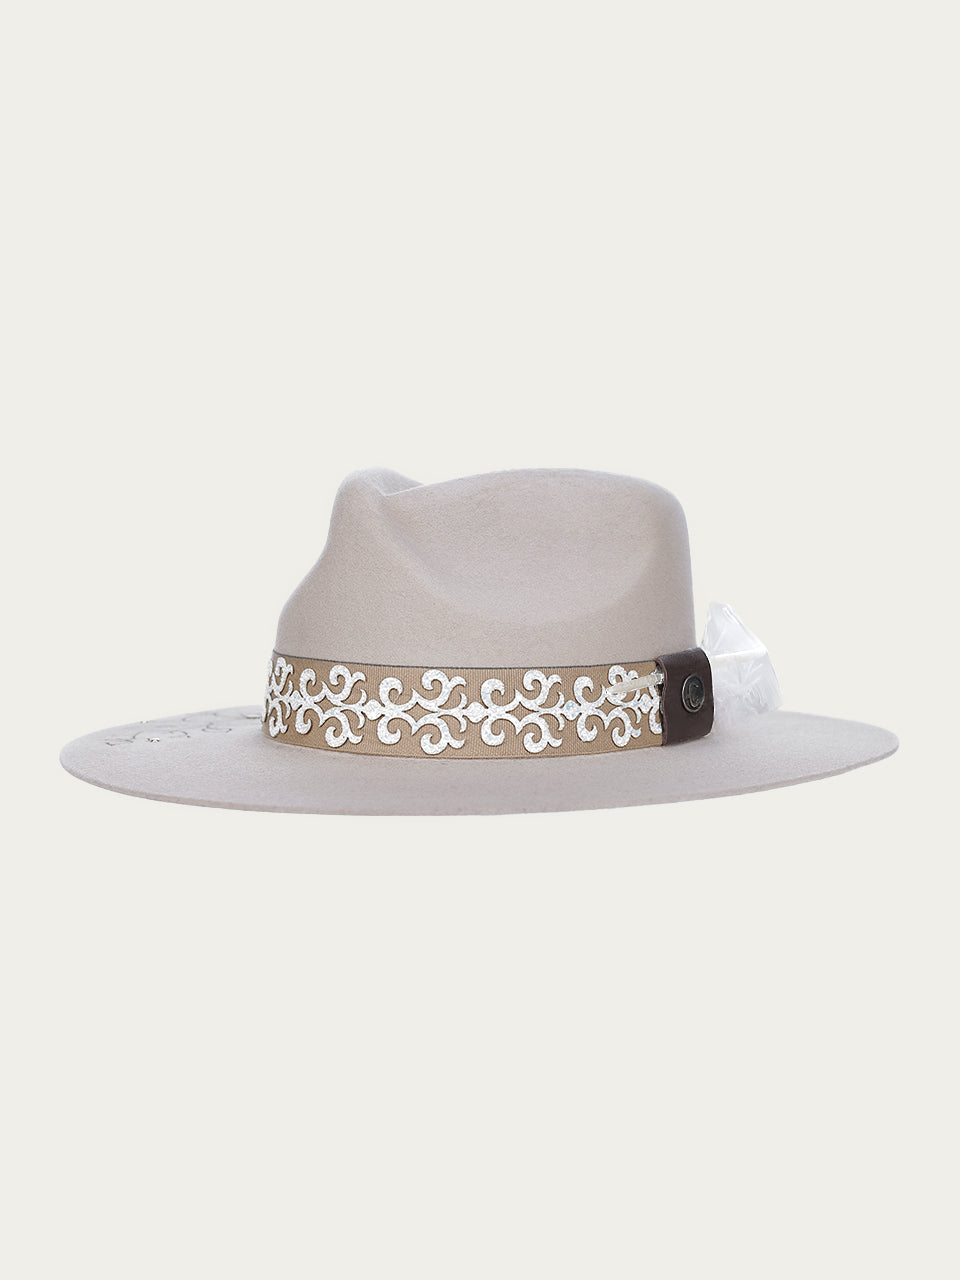 H0005 - TAN COWGIRL HAT WITH BROWN FLORAL EMBROIDERY GLITTERED OVERLAY HATBAND